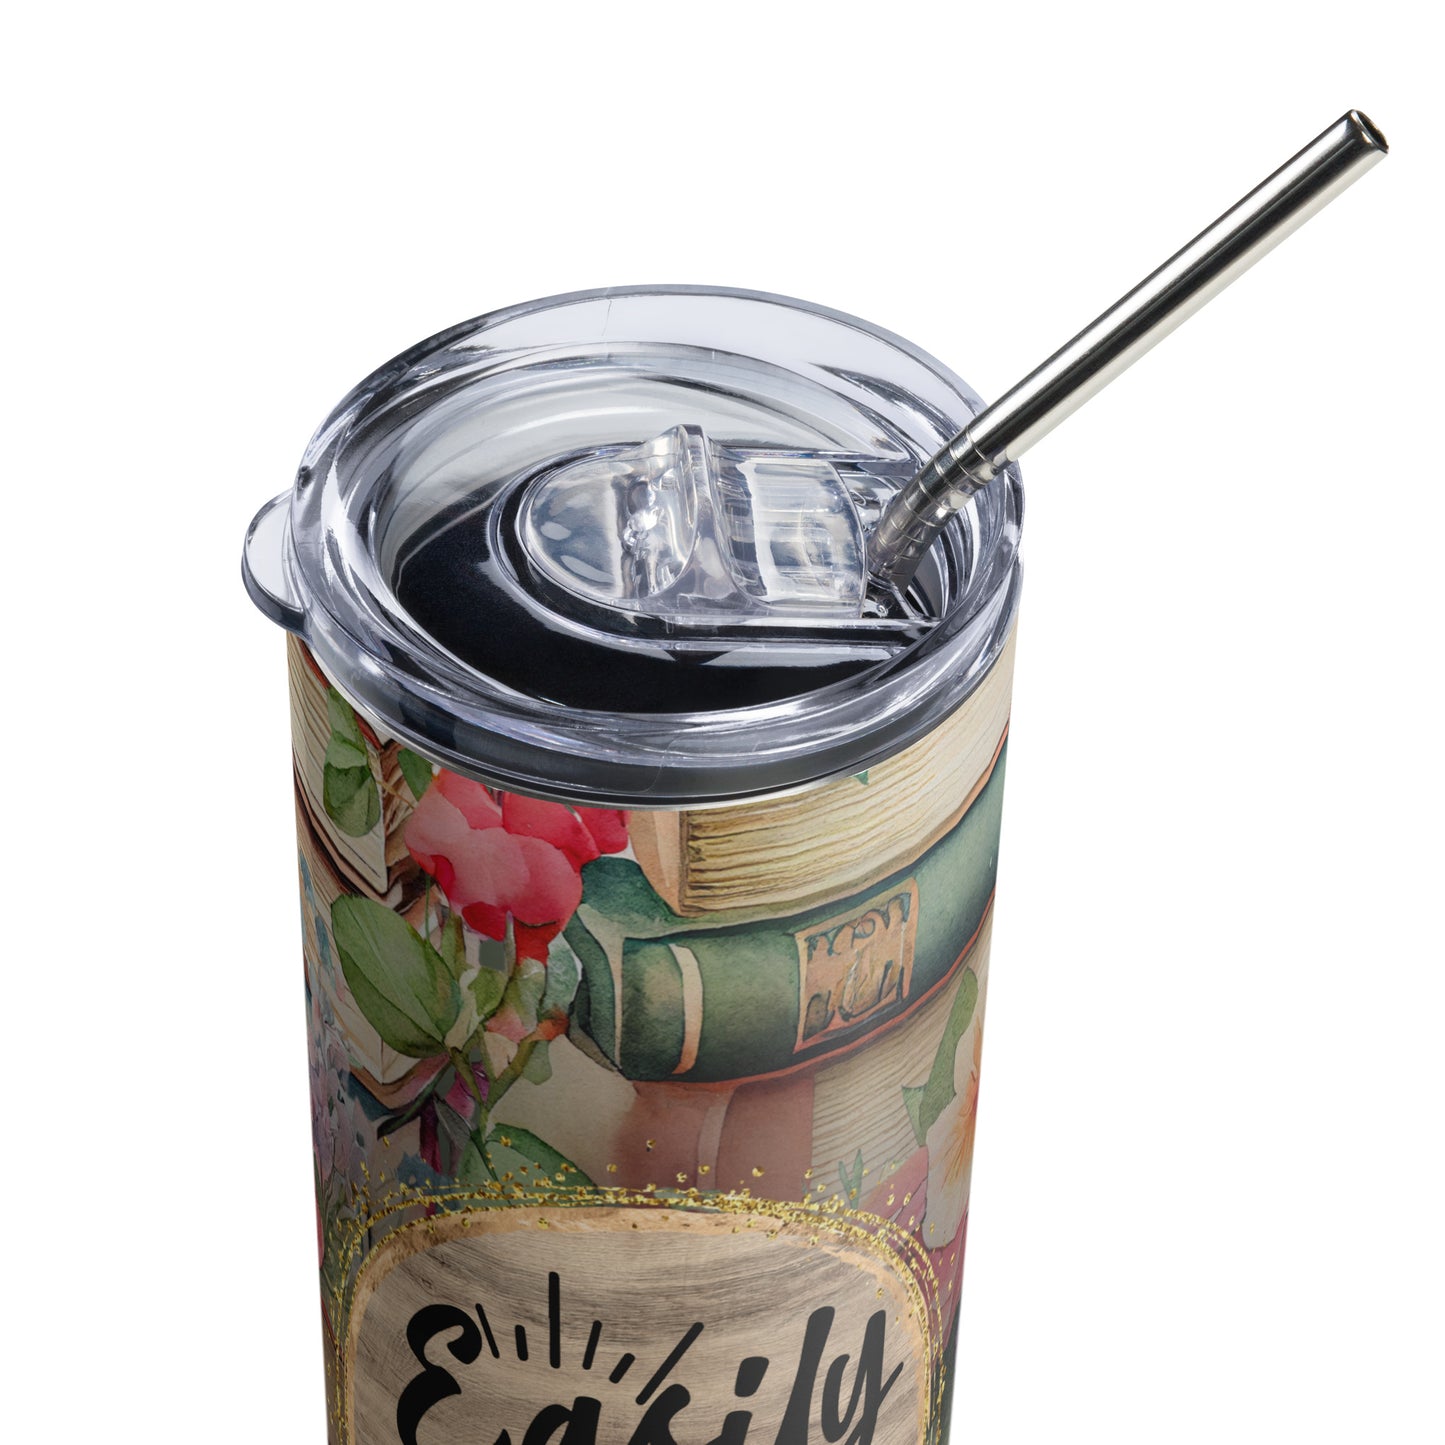 Easily Distracted by Books Themed Stainless steel tumbler CedarHill Country Market